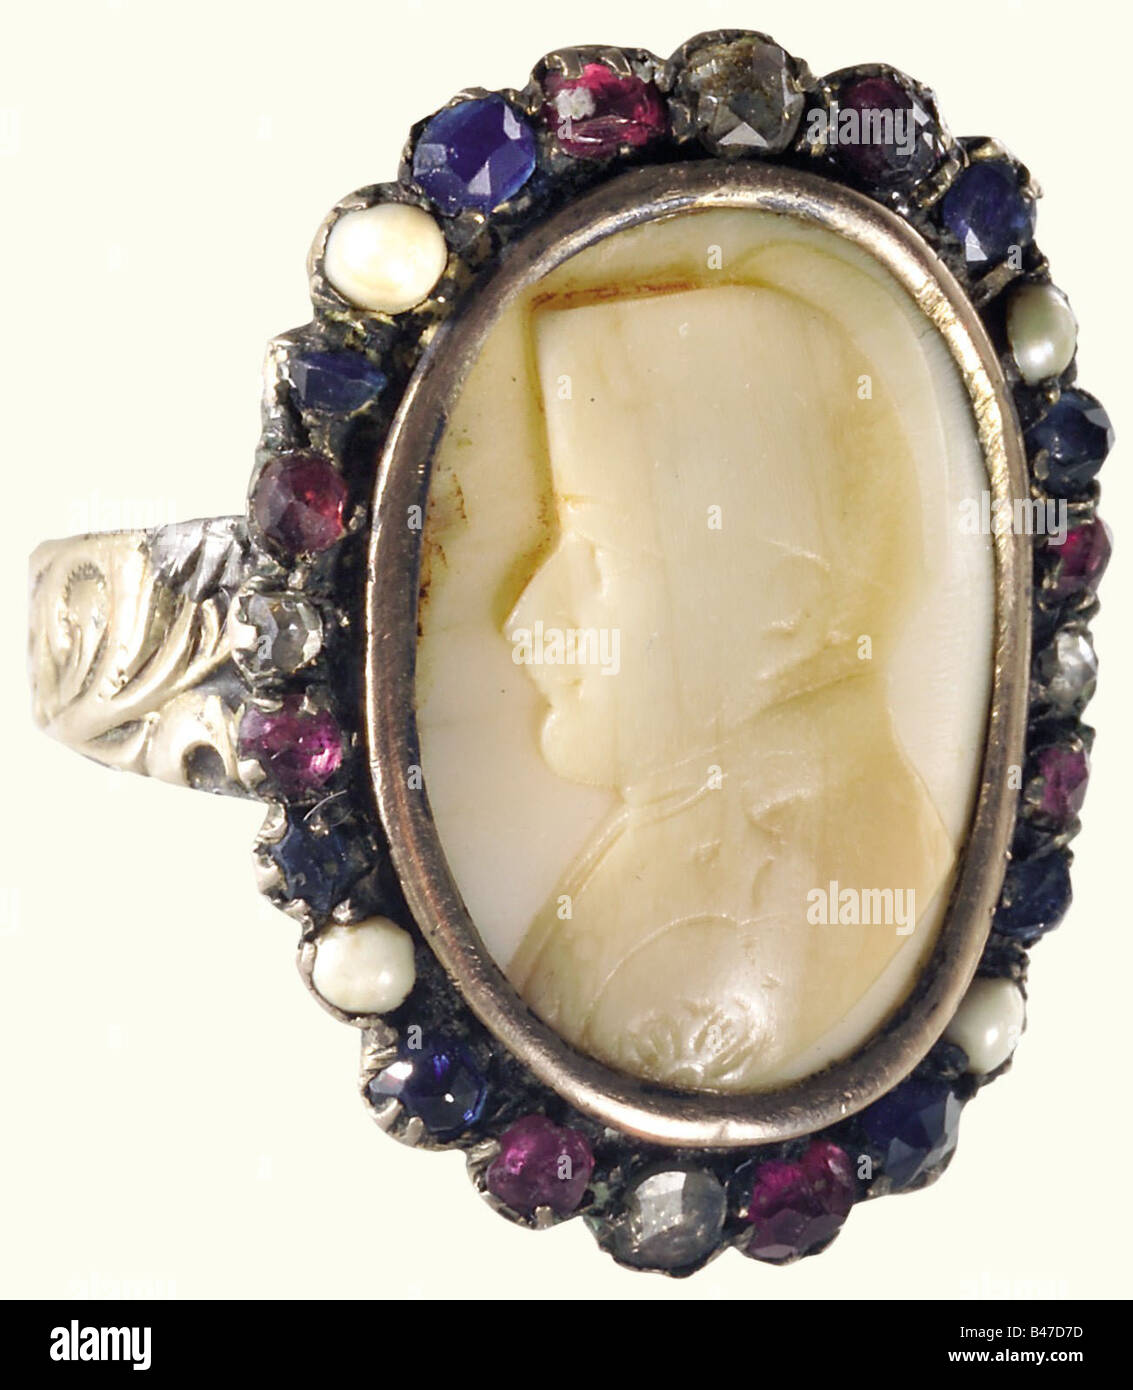 Napoleon I, a ring with a carved ivory portrait of the Emperor. A relief carved, ivory cameo with a profile portrait of Napoleon, set in gold, surrounded by a wreath of inset semi-precious stones and river pearls in the French national colours. Several repairs. From the possession of Count Edouard de Monteglas, purchased in 1885. See Hermann Historica, Auction 19, October 1988, Lot 2308, 4,800 DM (2,400 EUR), showing the documentation still available at that time. Presumably the work of the French cameo carver, engraver, and sculptor, Adolph David Baugé 1828 - , Stock Photo